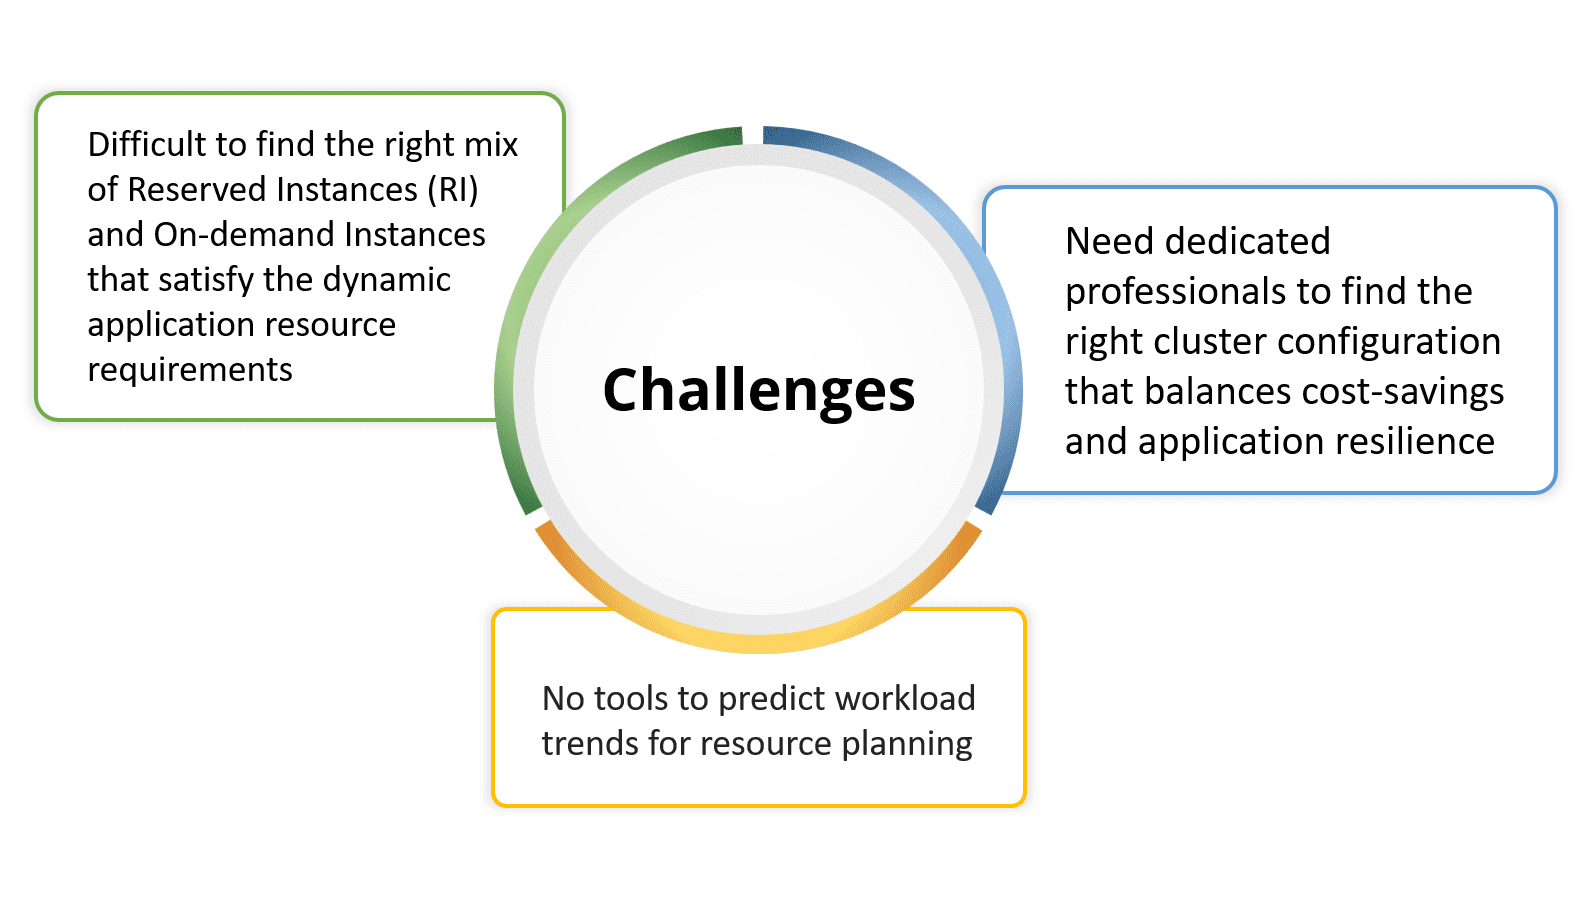 Finding right mix of RI and On-demand instances, Needing dedicated professionals, and requiring a tool to predict workload demands are challenges for MSPs